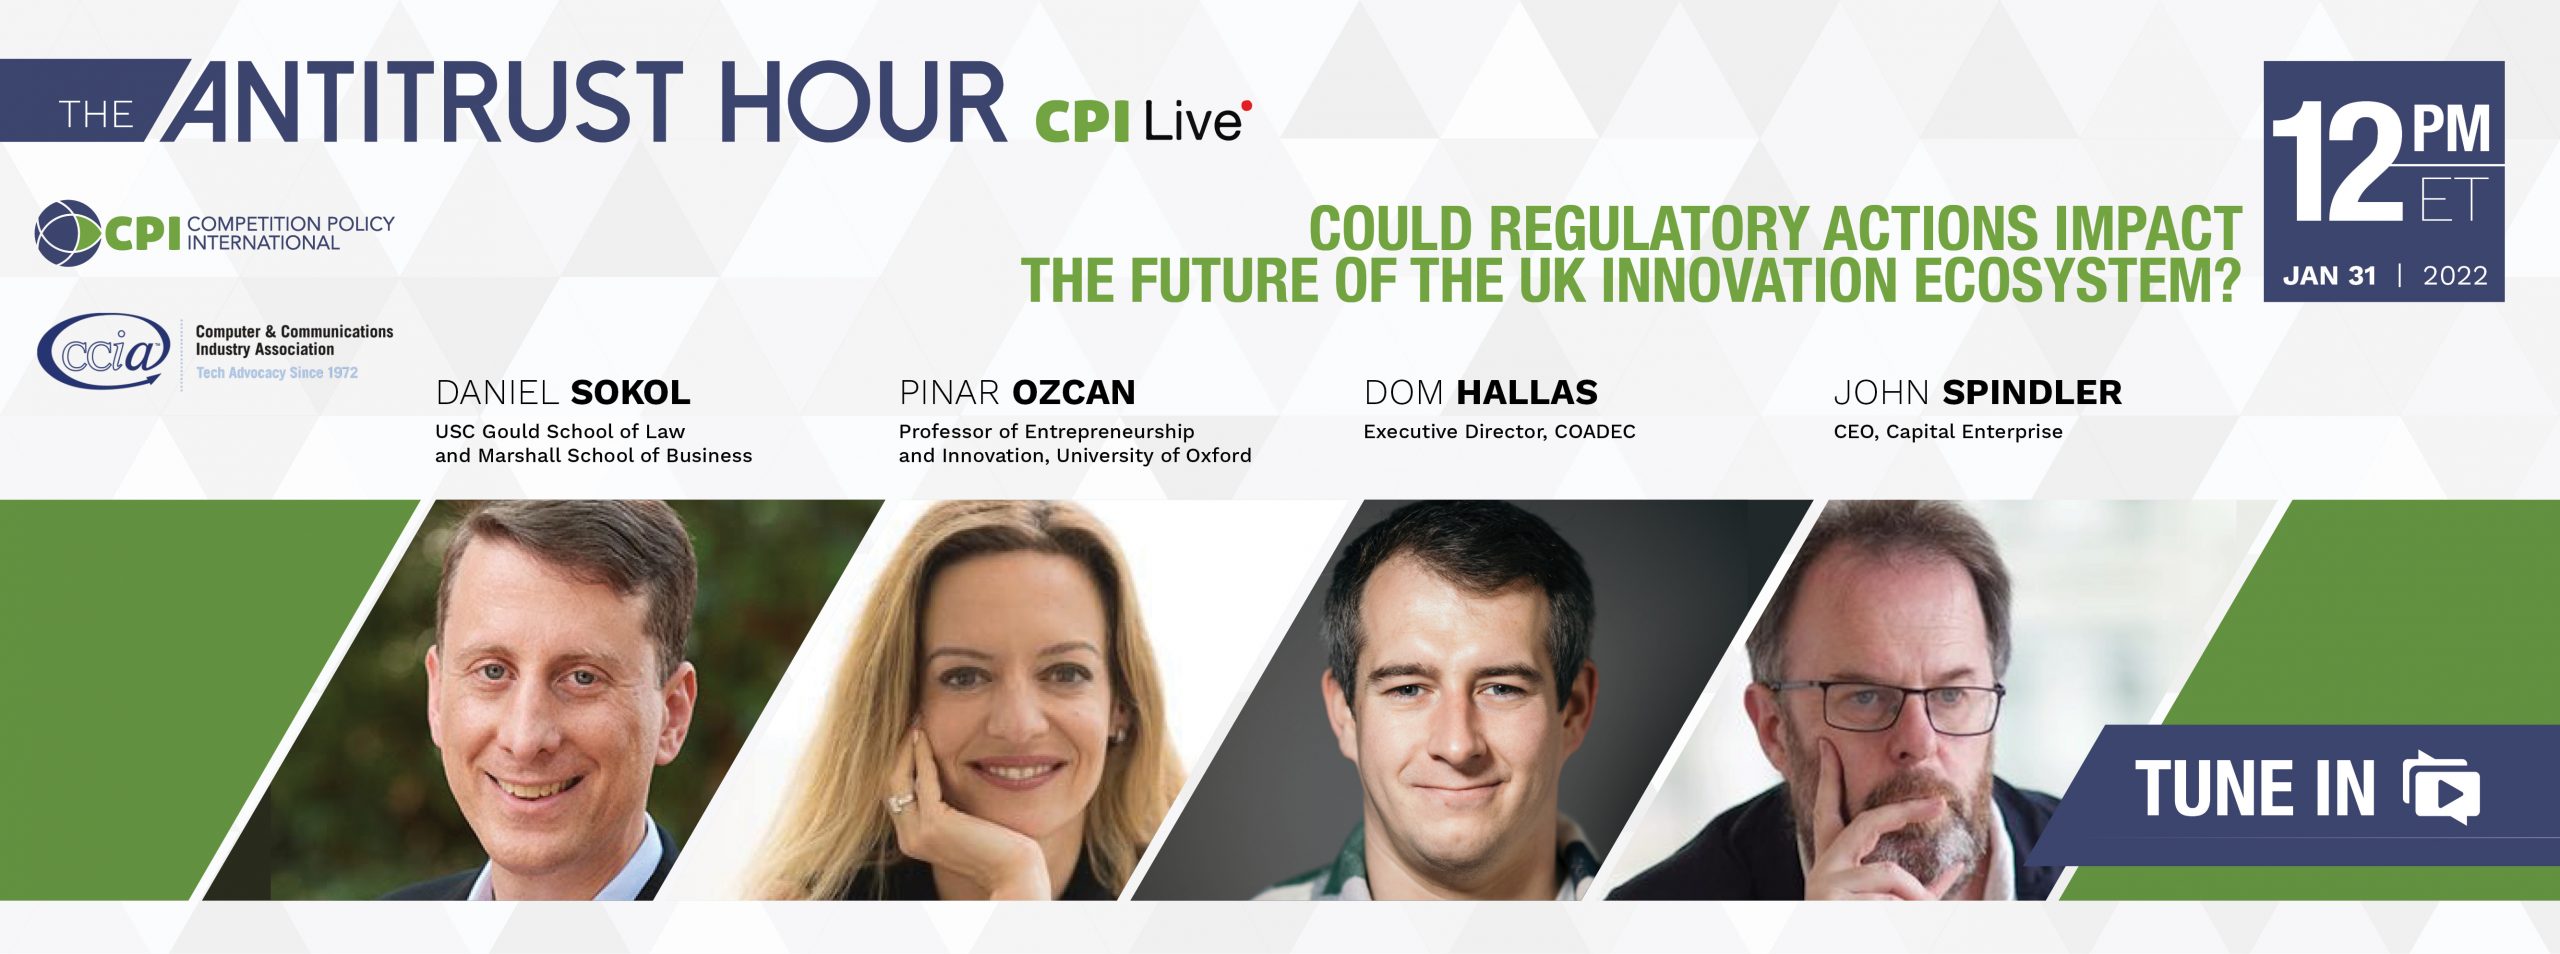 Register for Could Regulatory Actions Impact the Future of the UK Innovation Ecosystem?